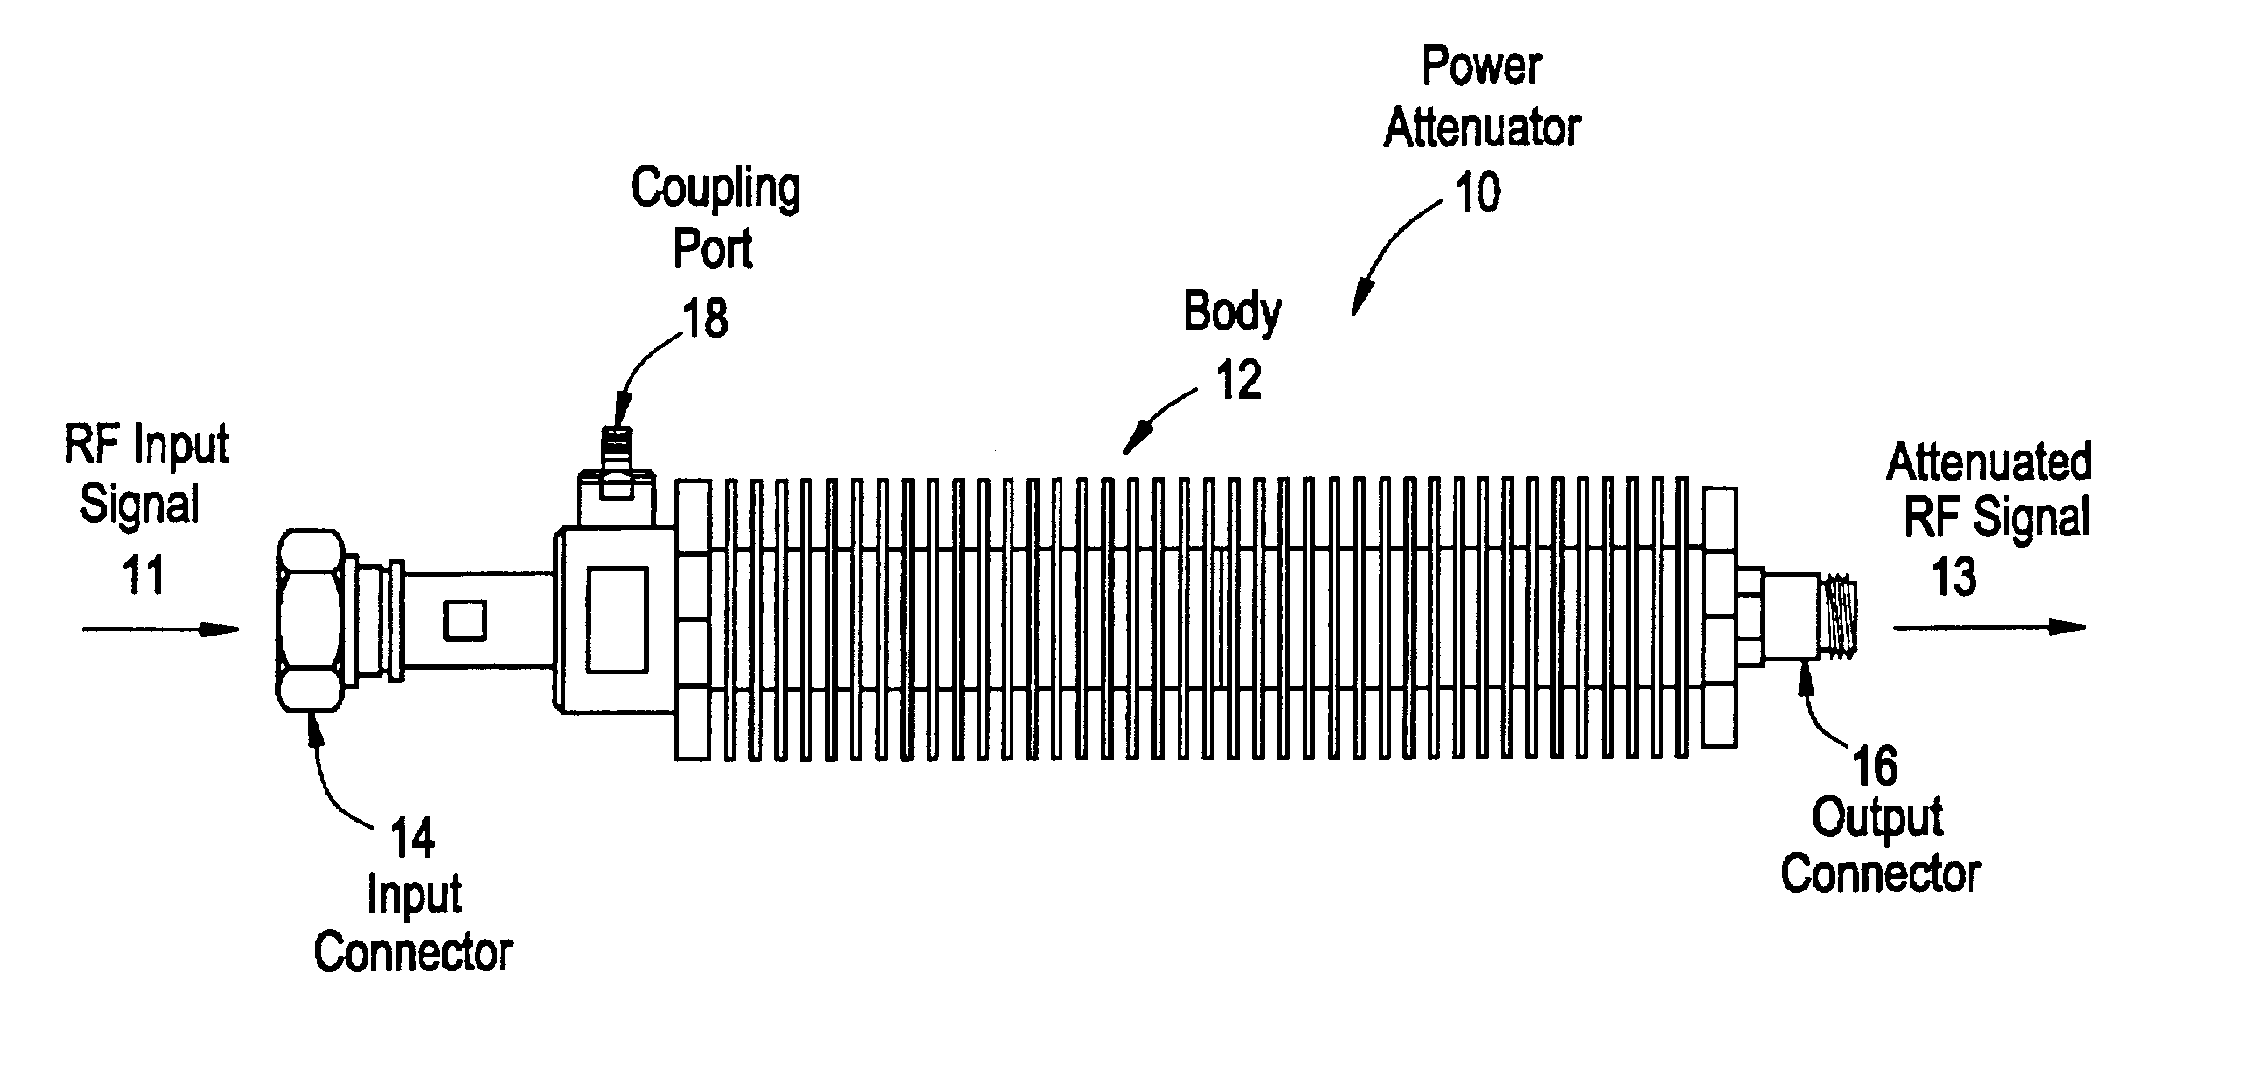 Power attenuator with coupling port